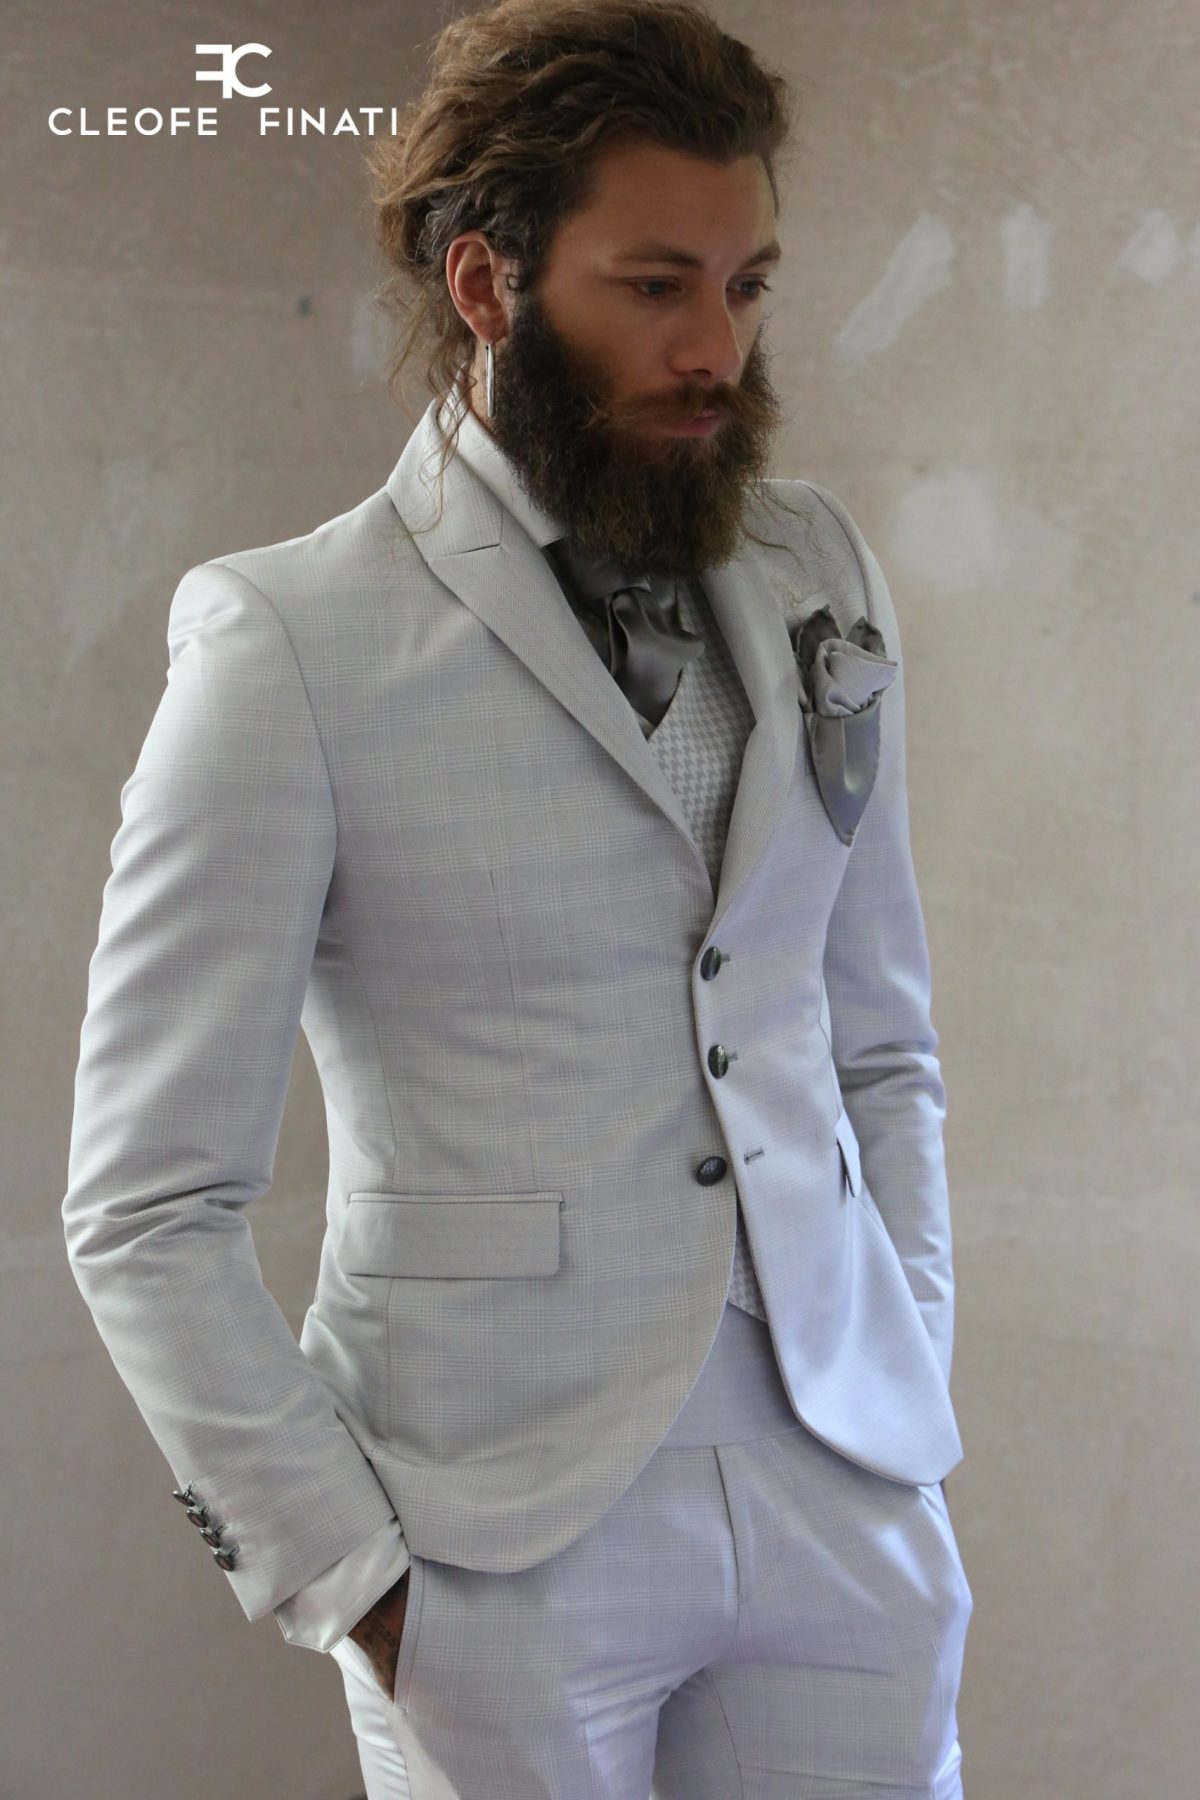 Andrea Marcaccini wears a suit of the Luxury Collection by Cleofe Finati